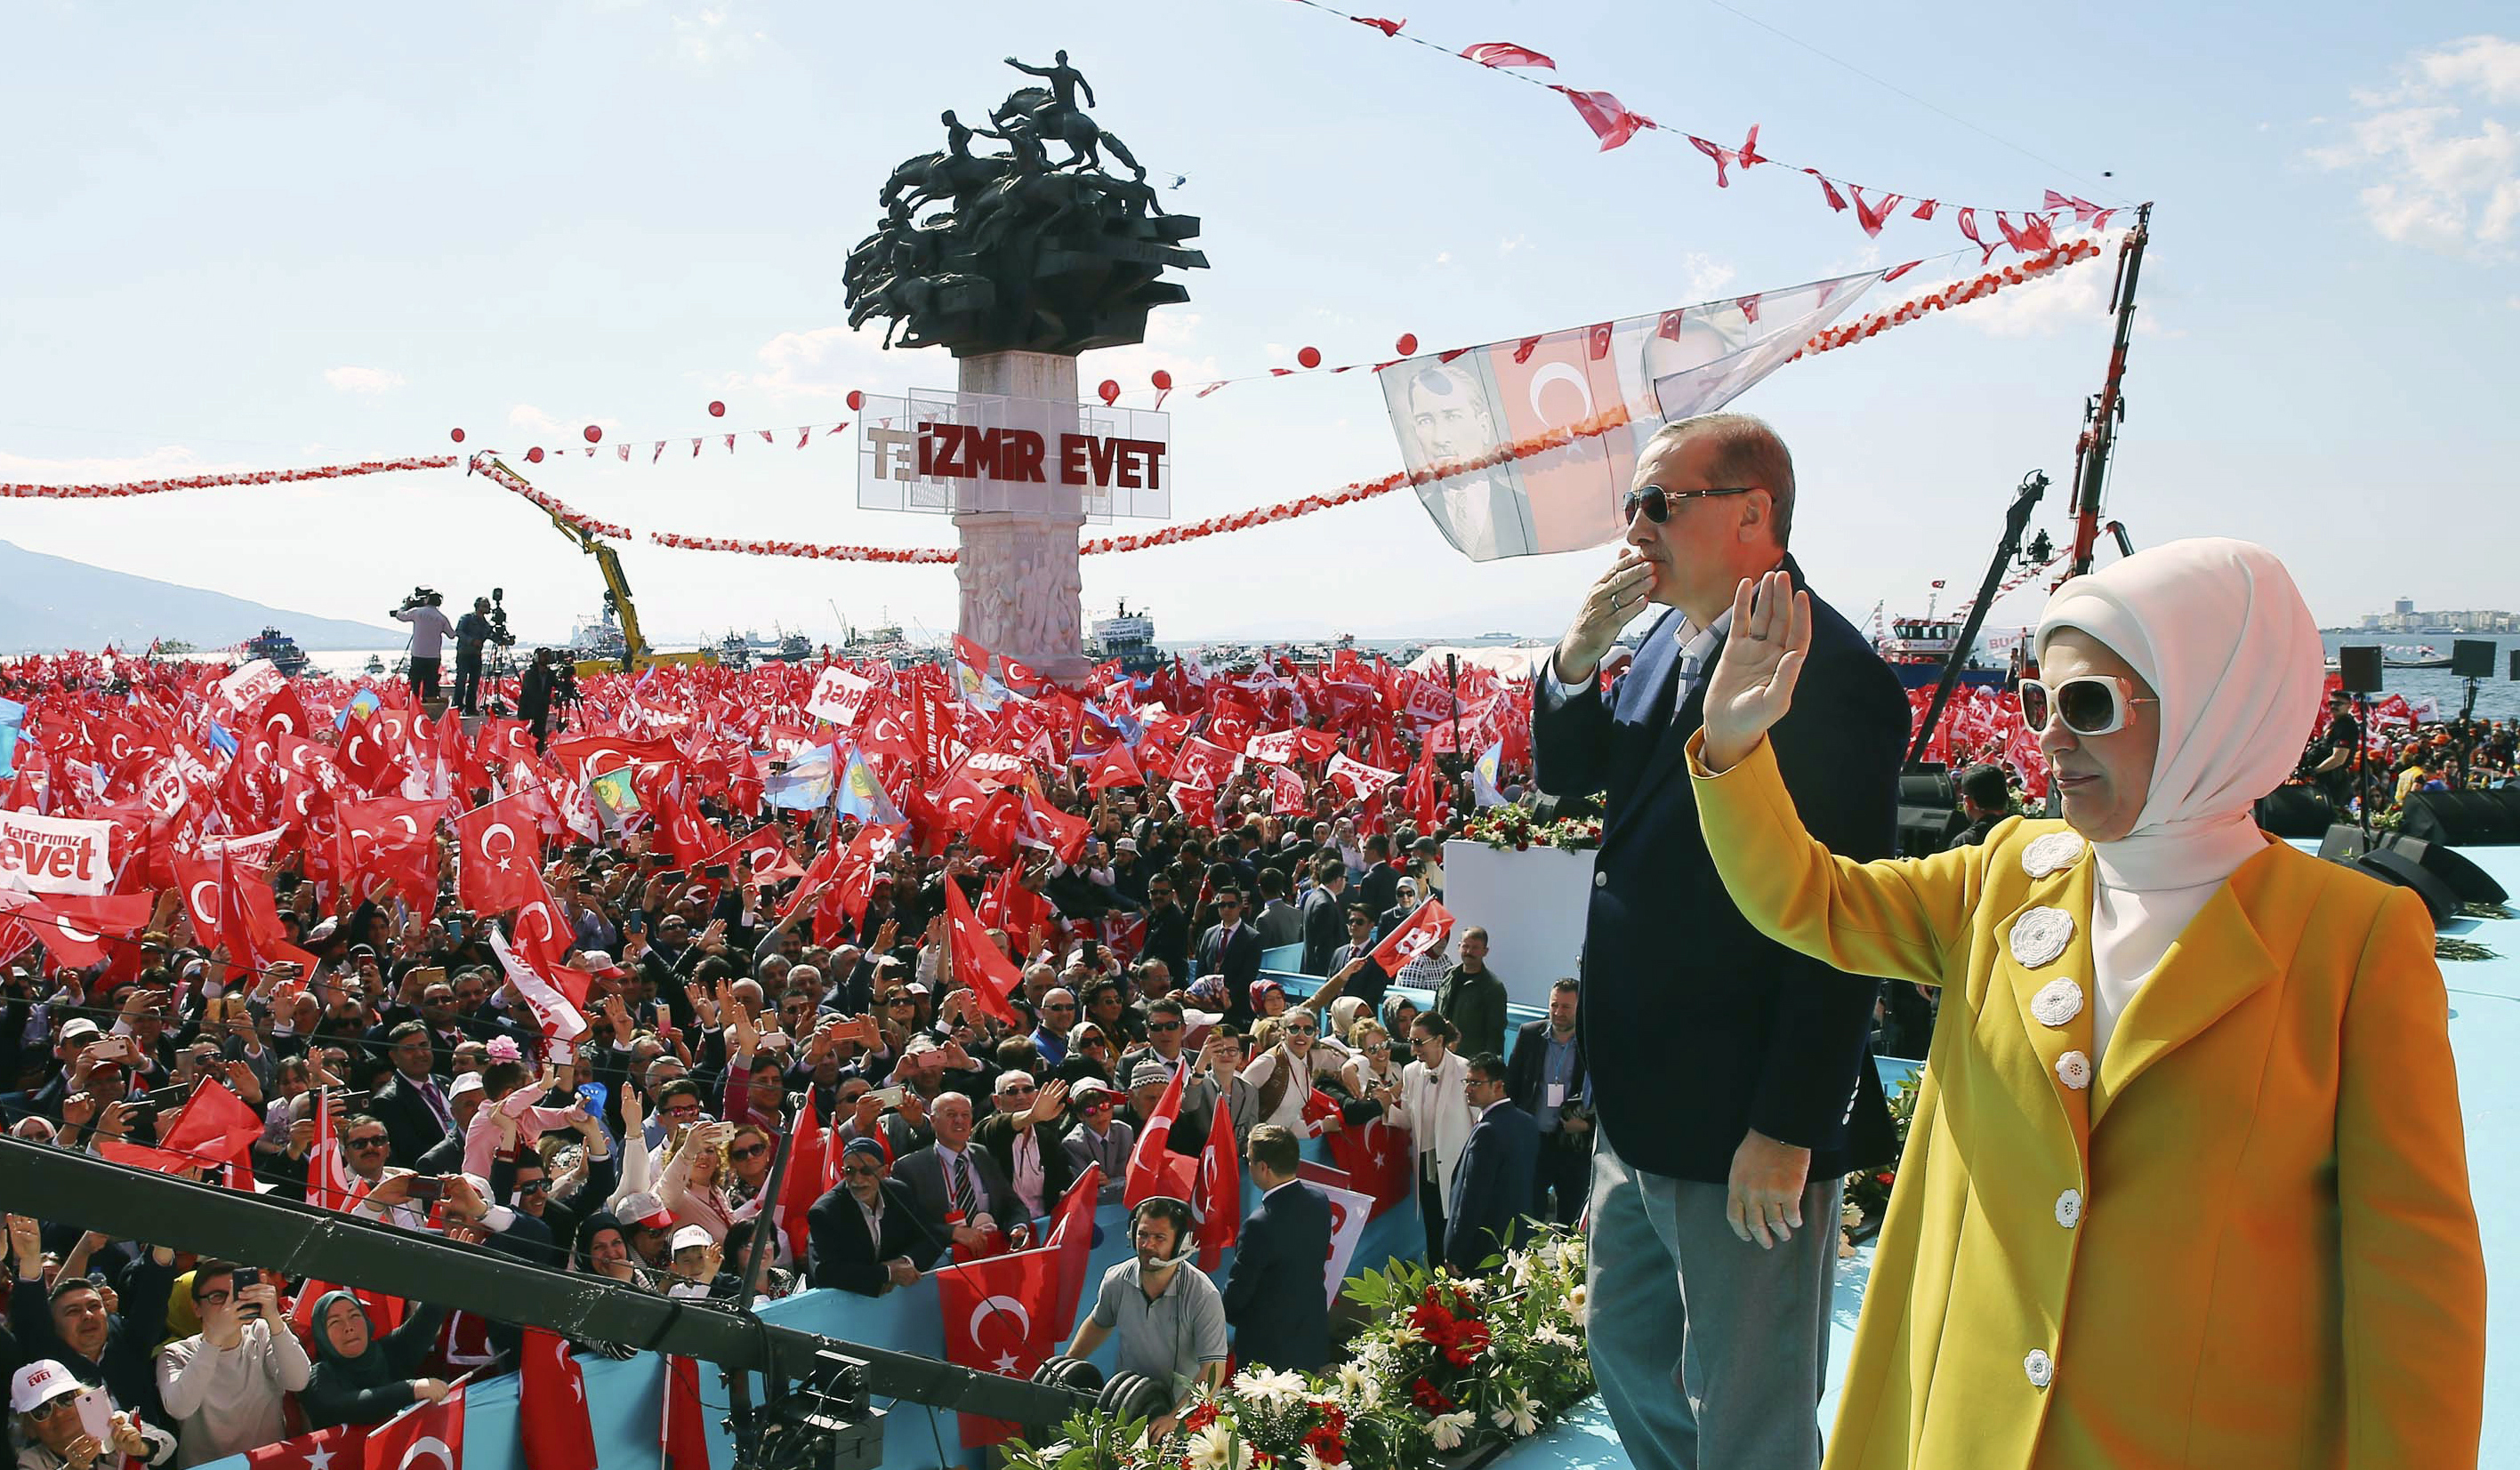 Turkey's President Recep Tayyip Erdogan and his wife Emine Erdogan salute supporters during a referendum rally in Izmir, Turkey, Sunday, April 9, 2017. Turkey is heading to a contentious April 16 referendum on constitutional reforms to expand Erdogan's powers. (Kayhan Ozer/Presidential Press Service, Pool Photo via AP)